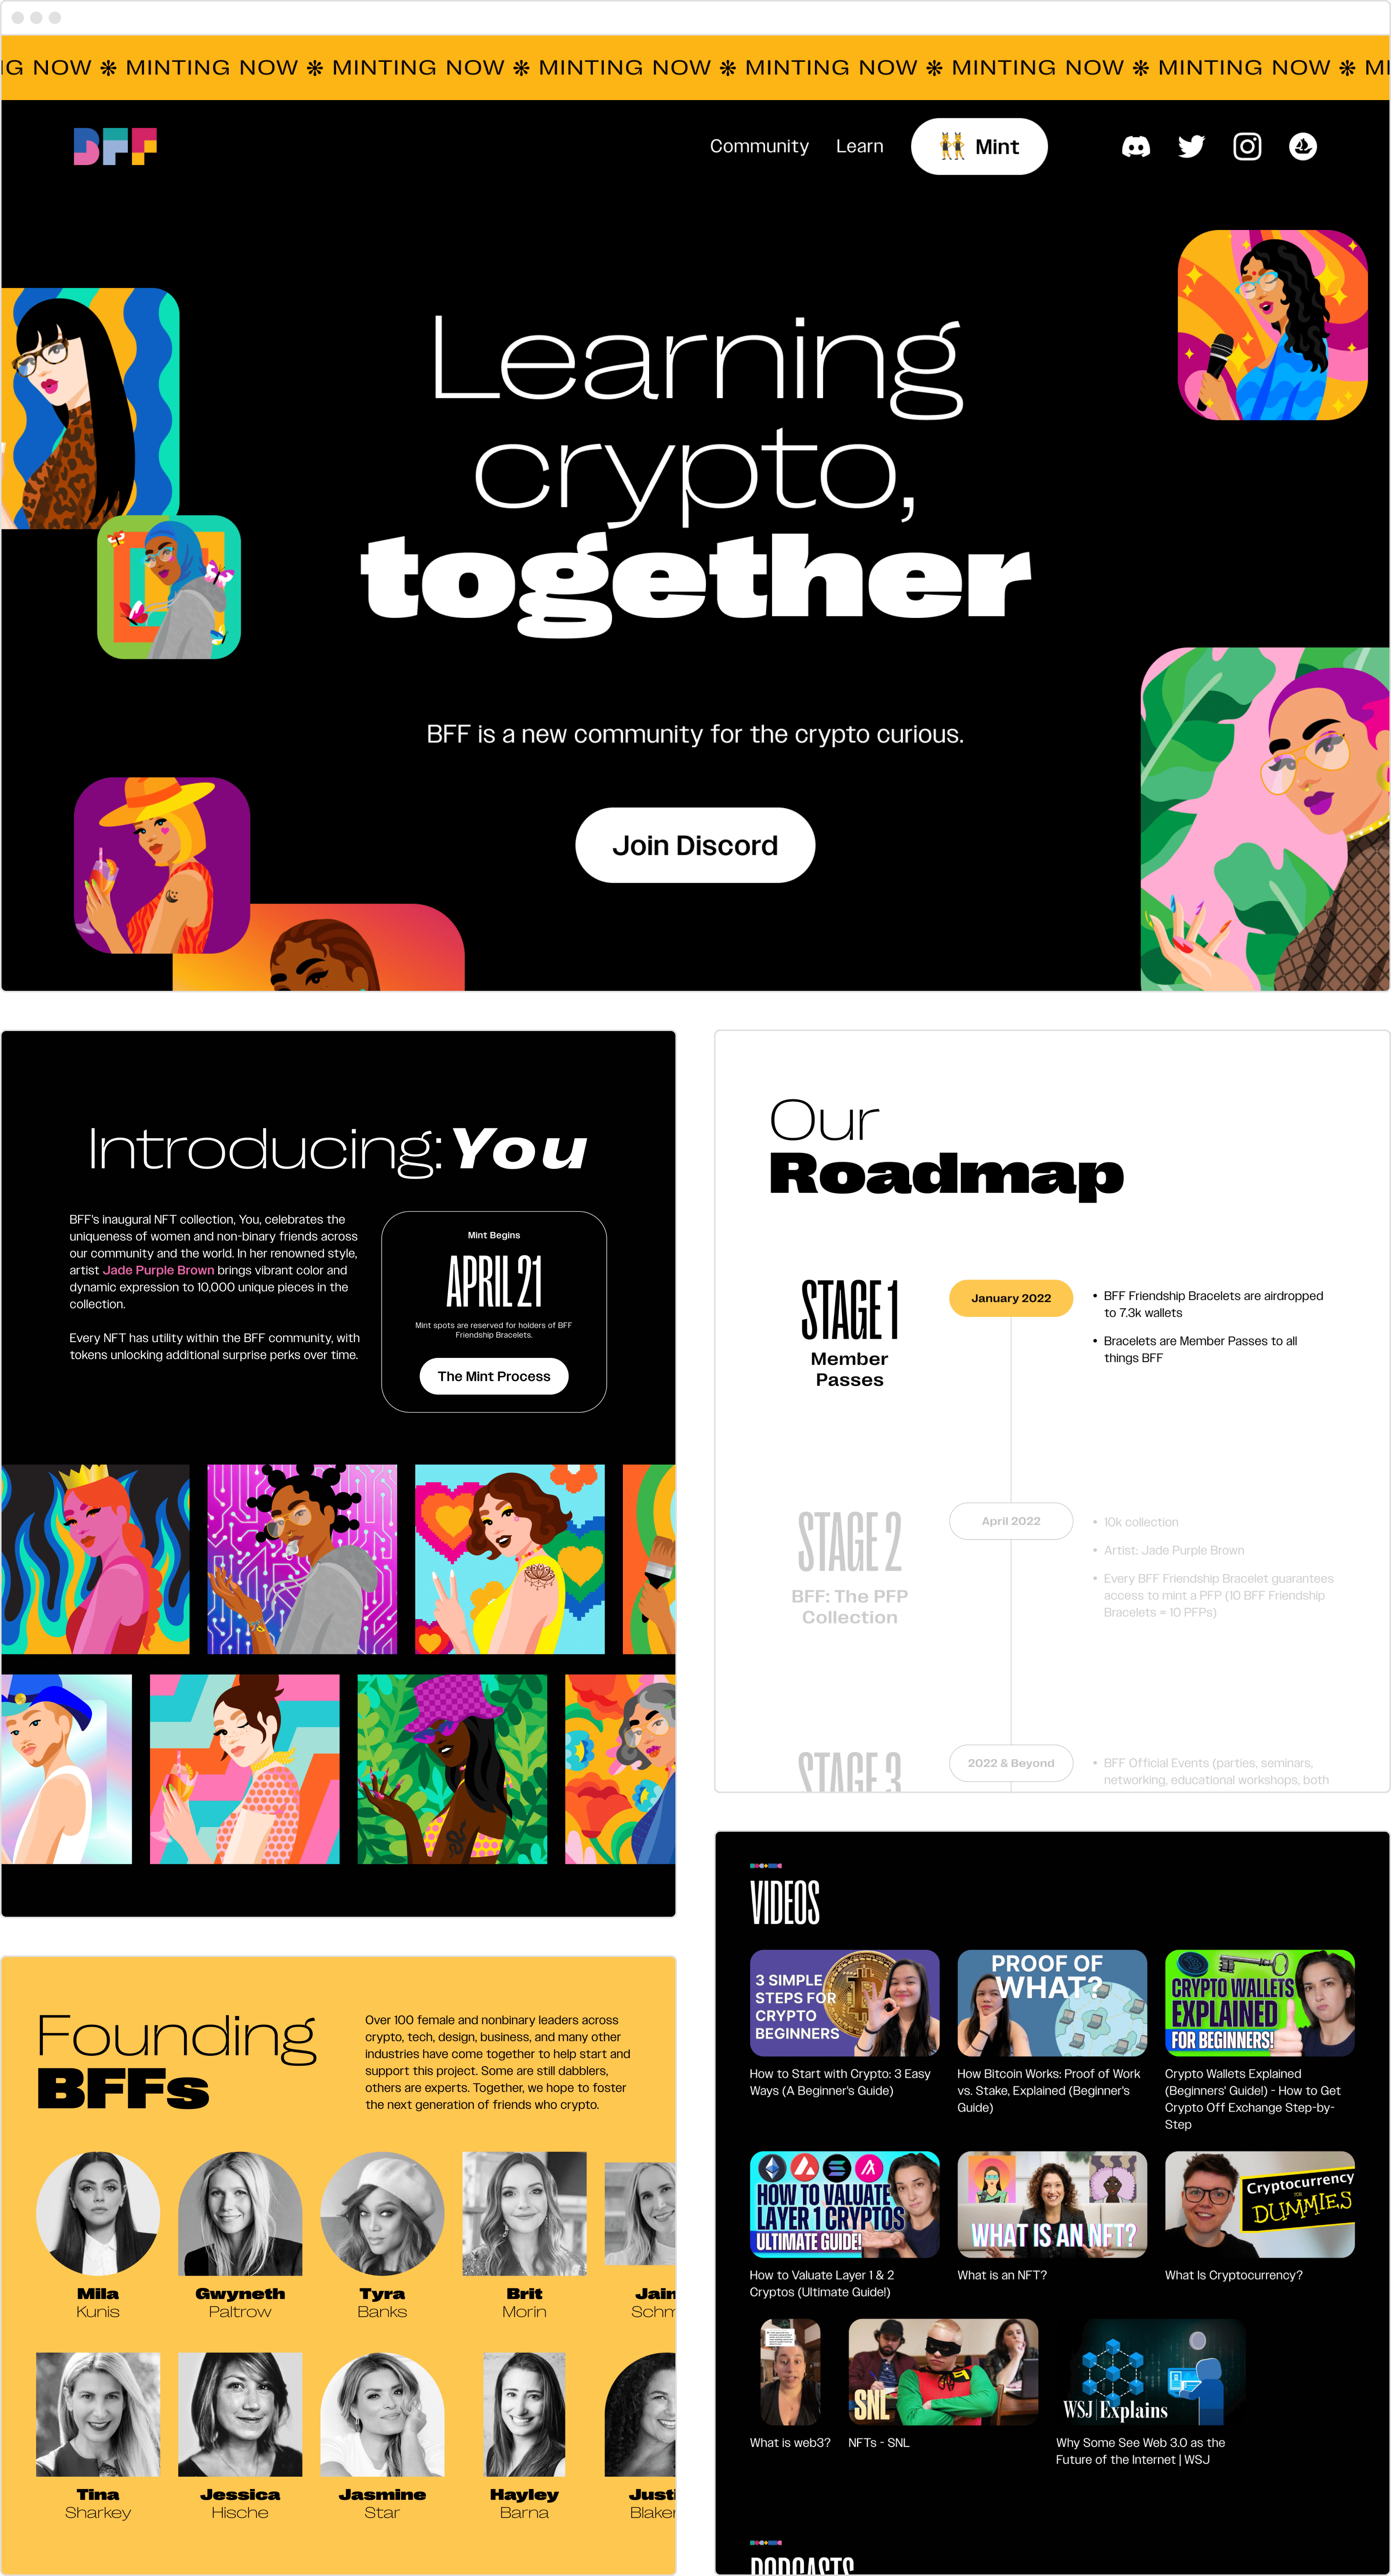 Different snippets from the BFF website